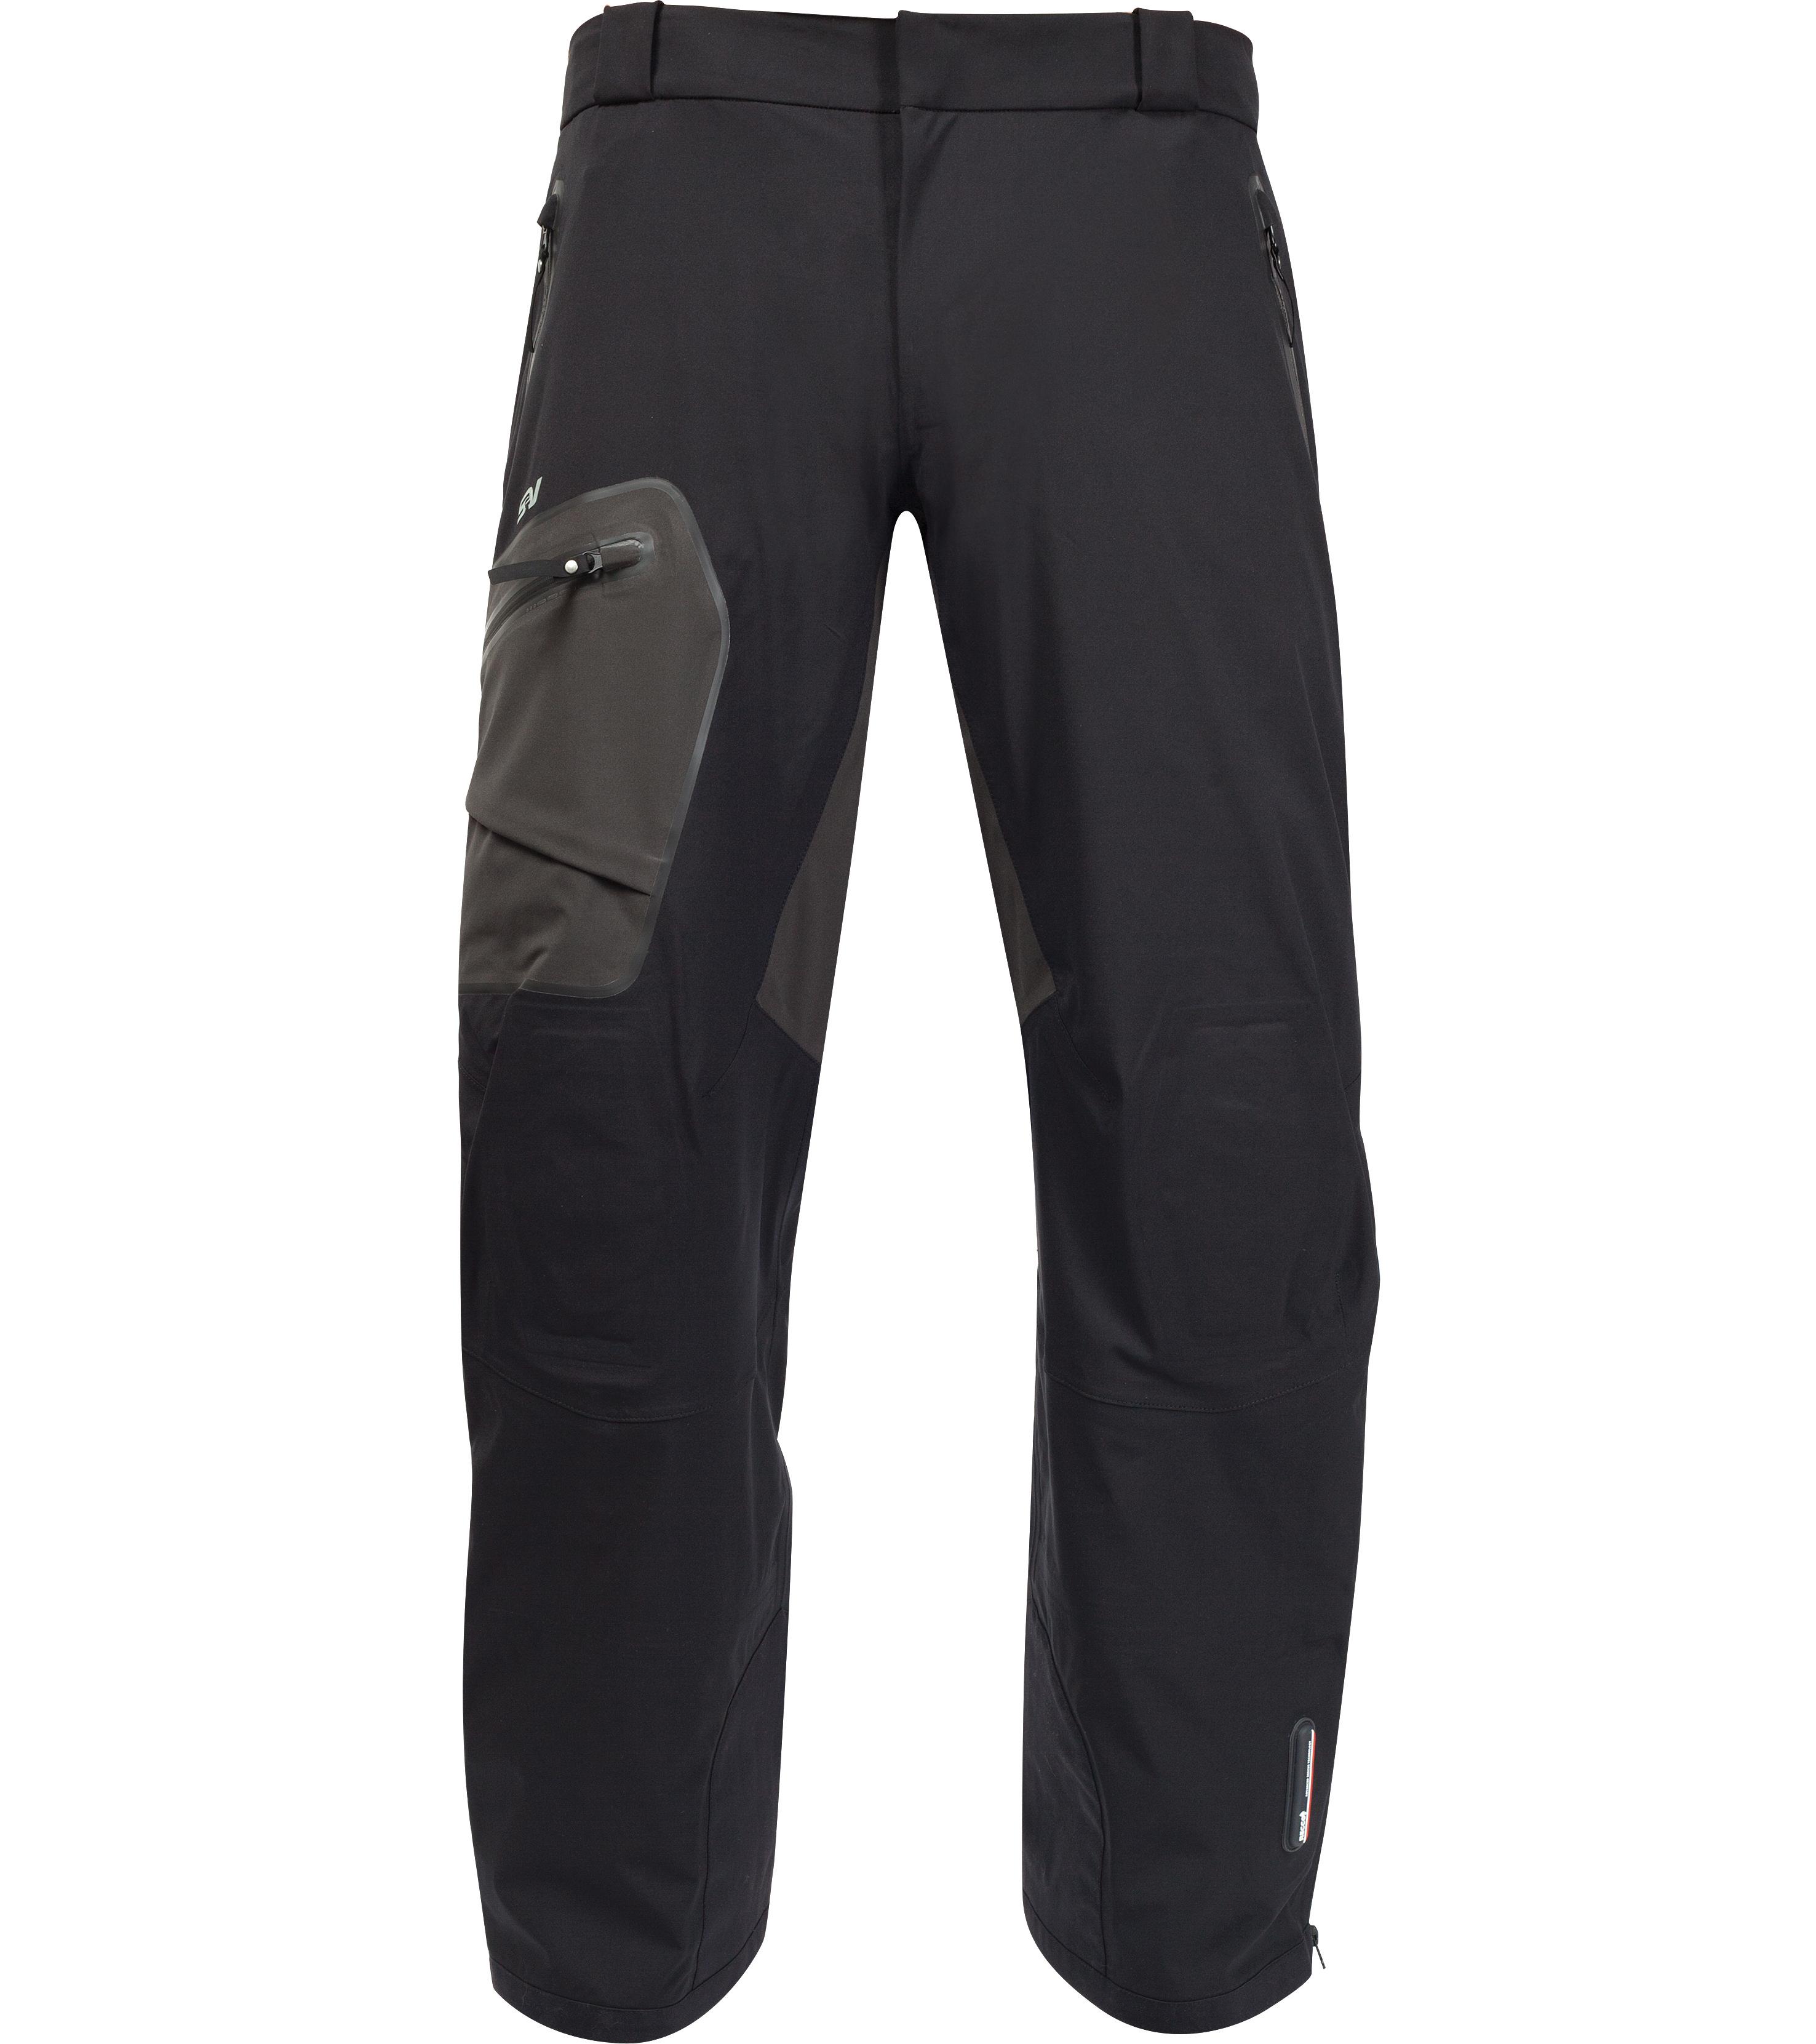 Rocky S2V: get Men's Waterproof Insulated Provision Pants